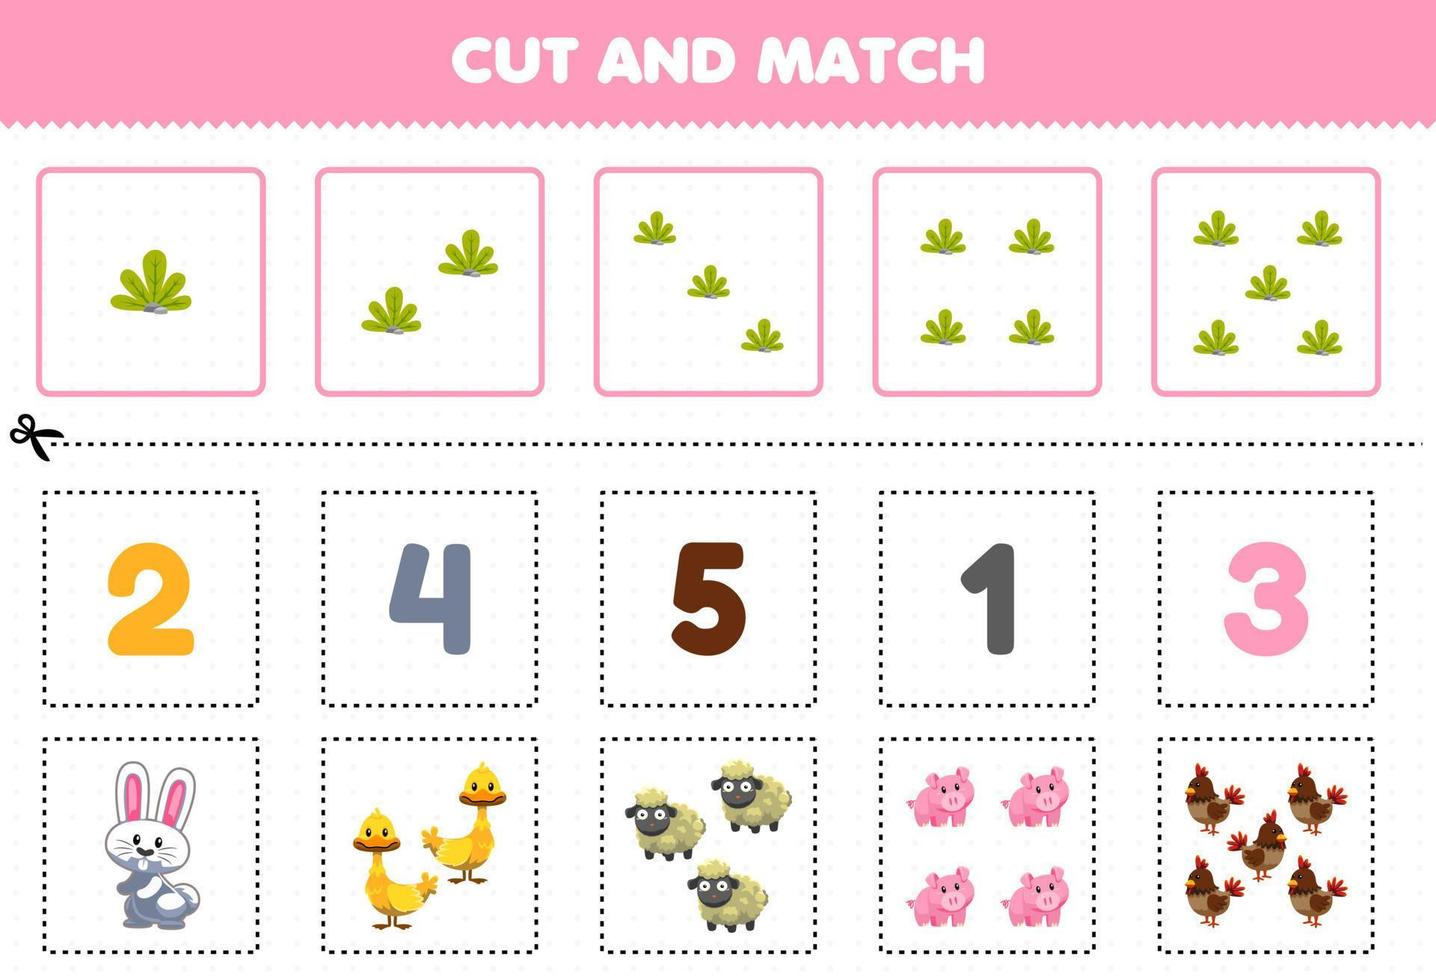 Education game for children cut and match the same number of cute cartoon farm animal printable worksheet vector